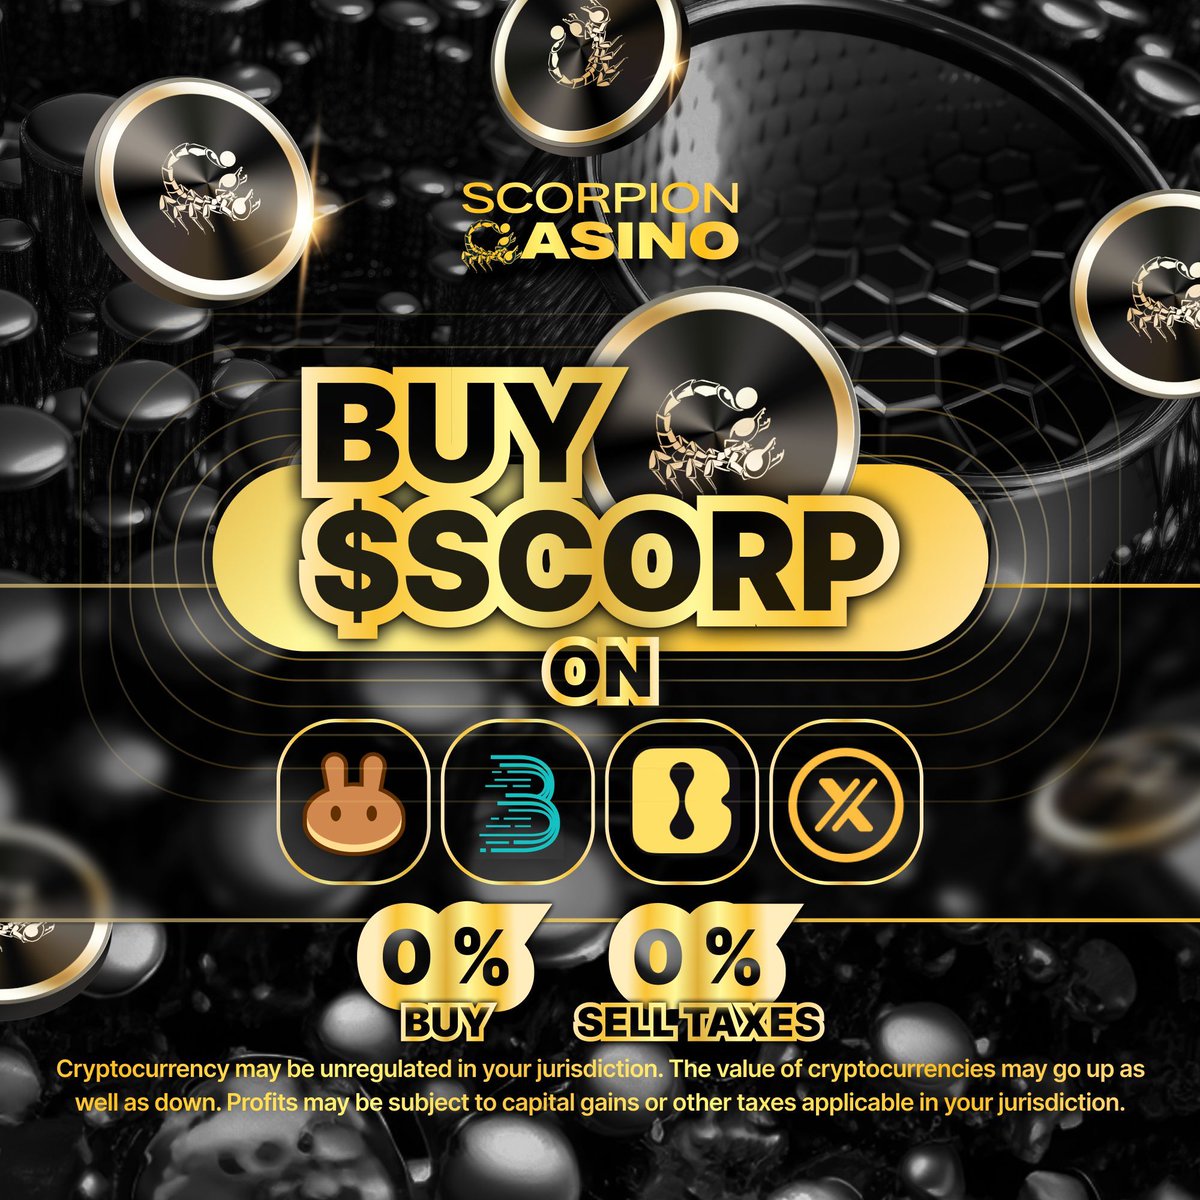 GOLDEN CHANCE TO BUY CHEAP $SCORP 🏆

💼 Taxes: 0% Buy / 0% Sell 

💲 Buy now on Pancakeswap HERE: 
buff.ly/3UlwSpf

💲 Buy now on Dexview: 
buff.ly/3W3dqiw

🆕 Trade $SCORP on XT now
buff.ly/3JKvvdP